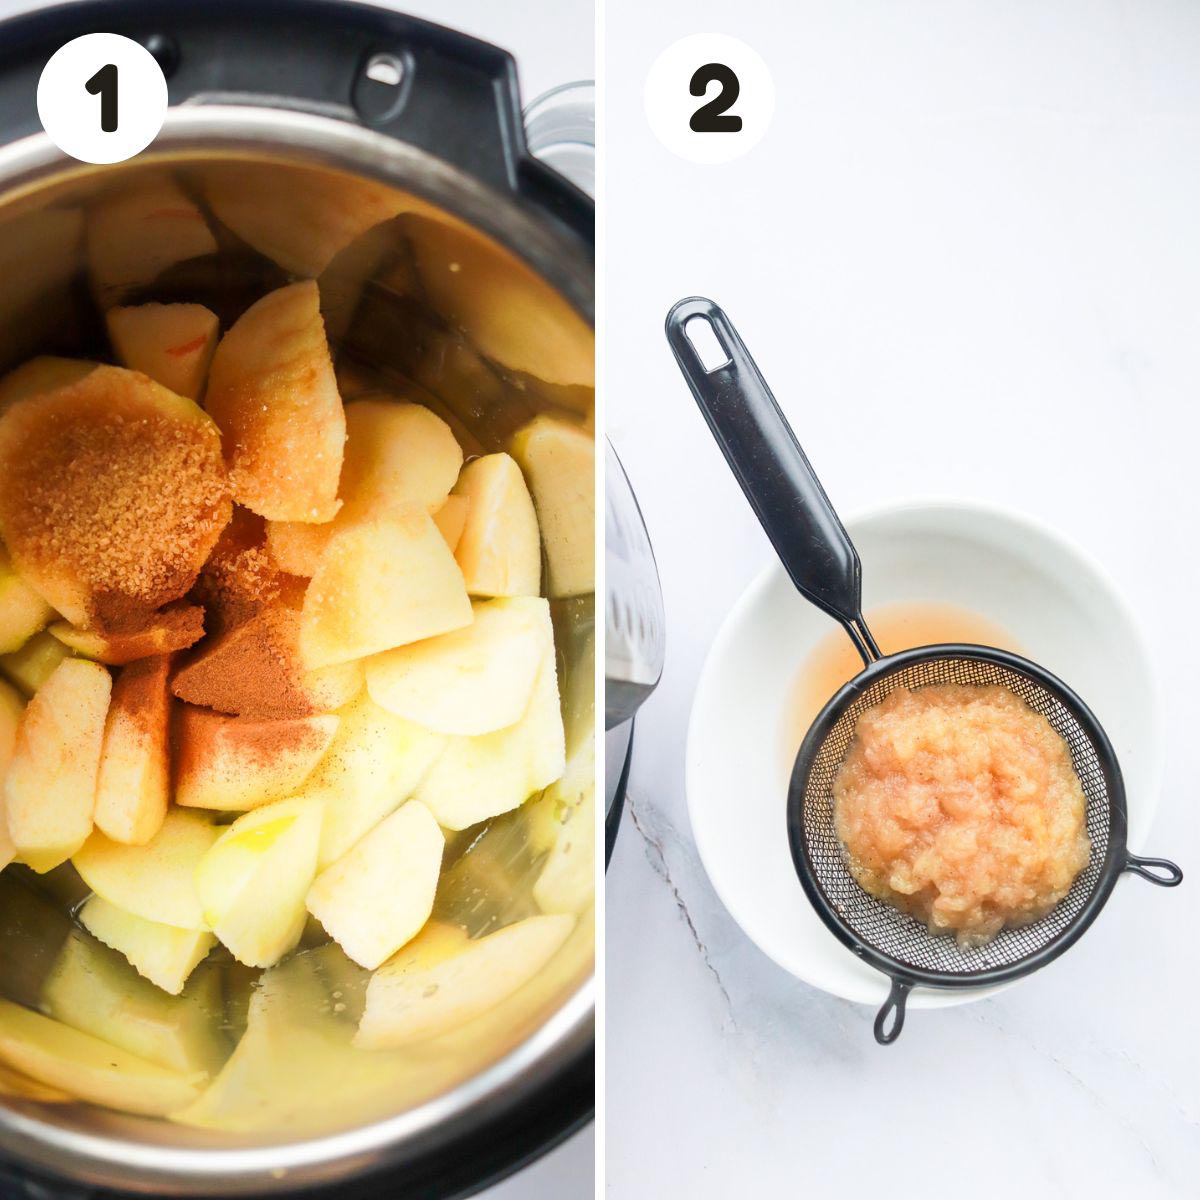 Steps to make the applesauce.